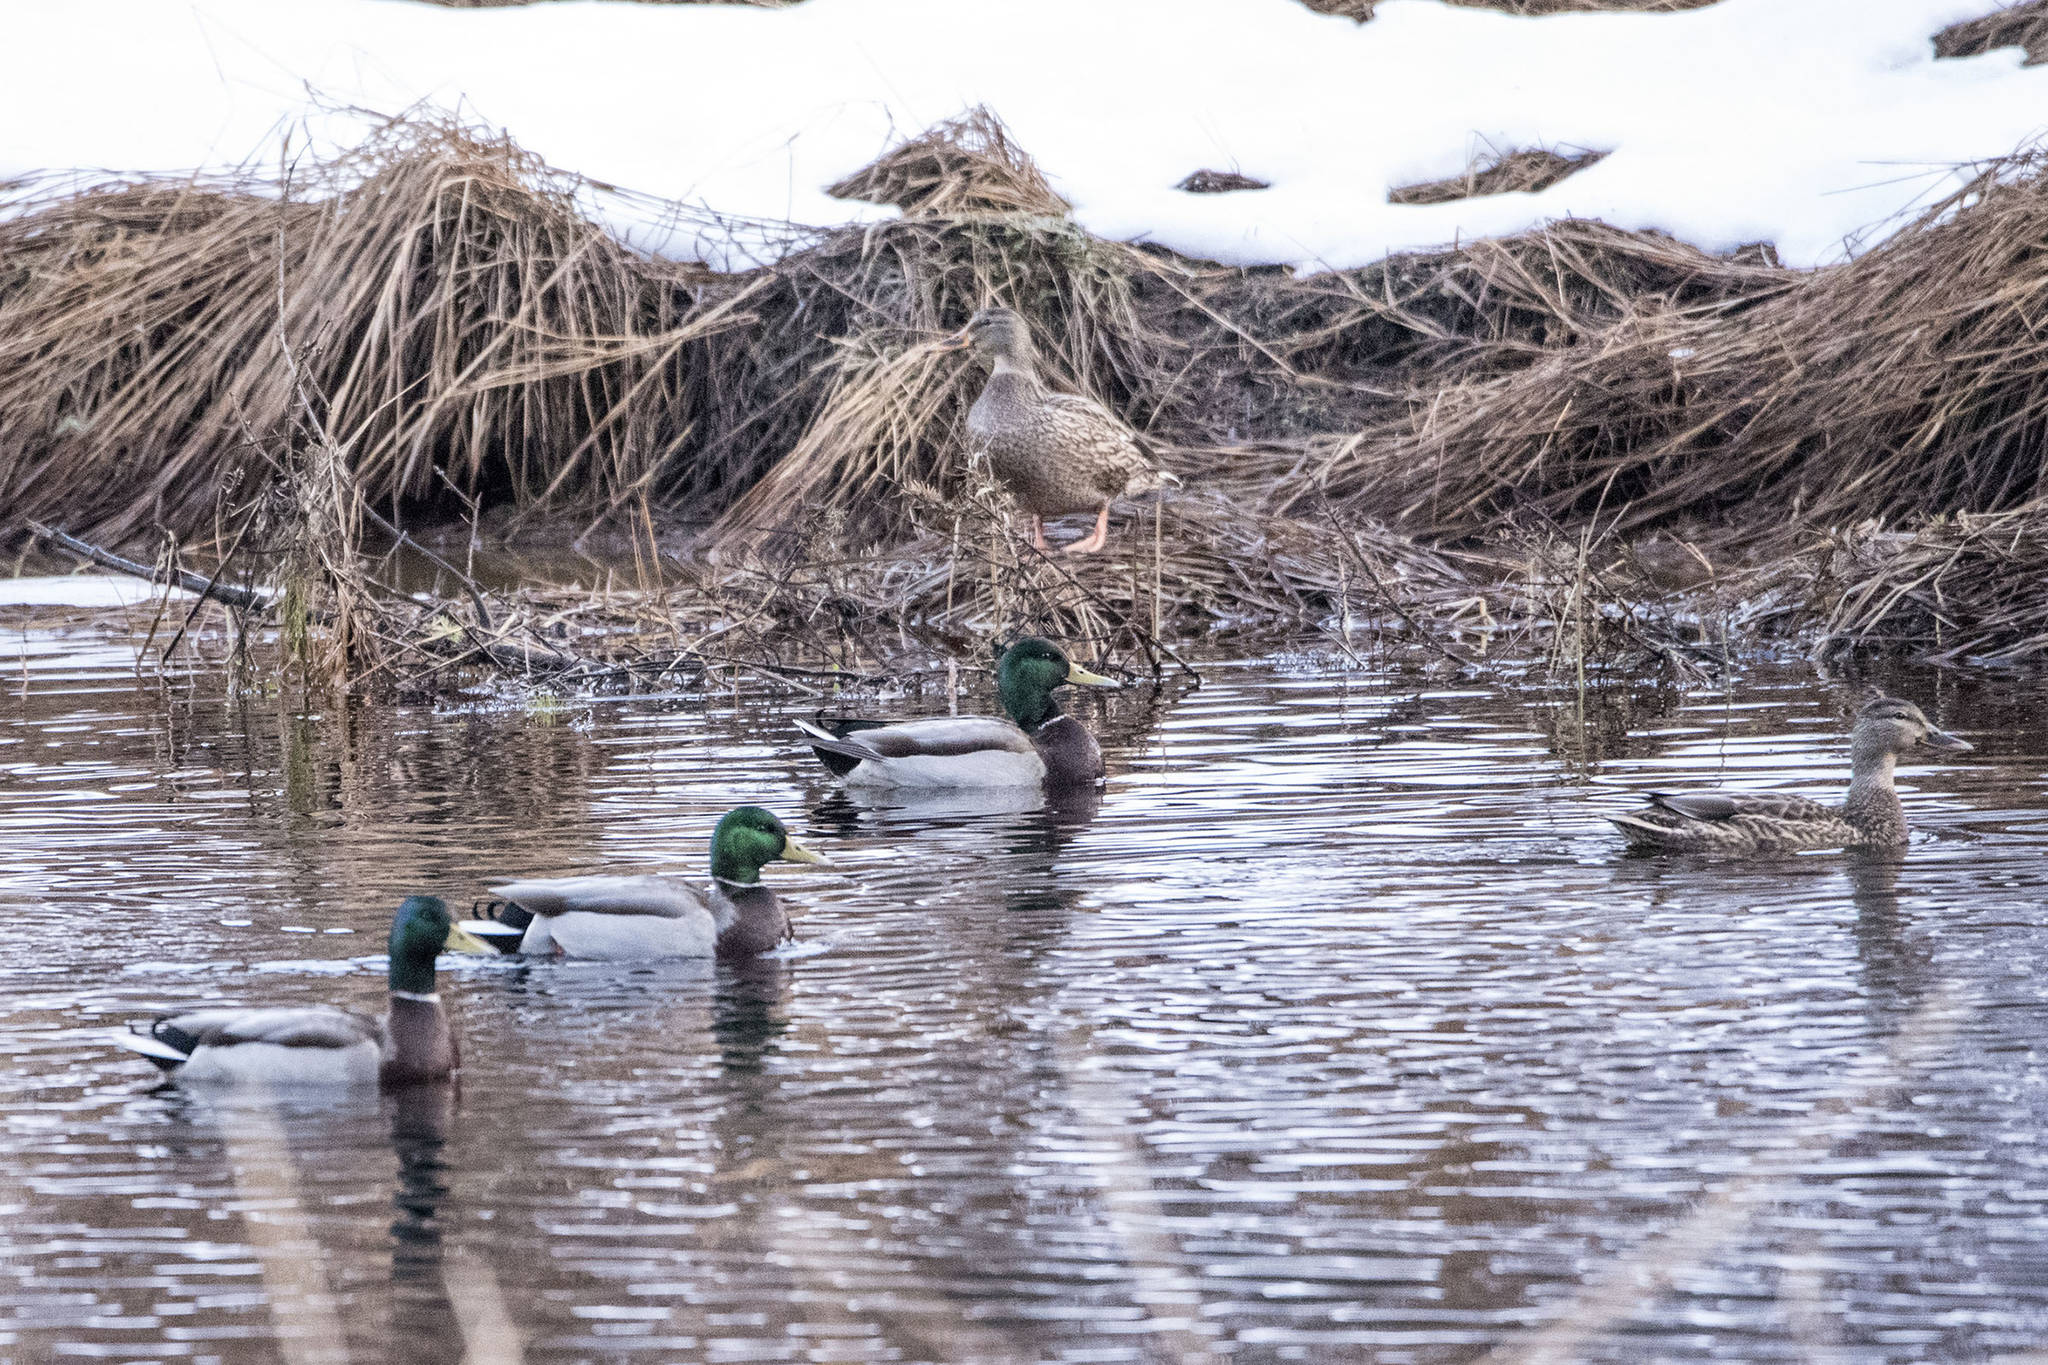 Part of a sord of mallards swims by the salt chuck. (Courtesy Photo / Kenneth Gill, gillfoto)